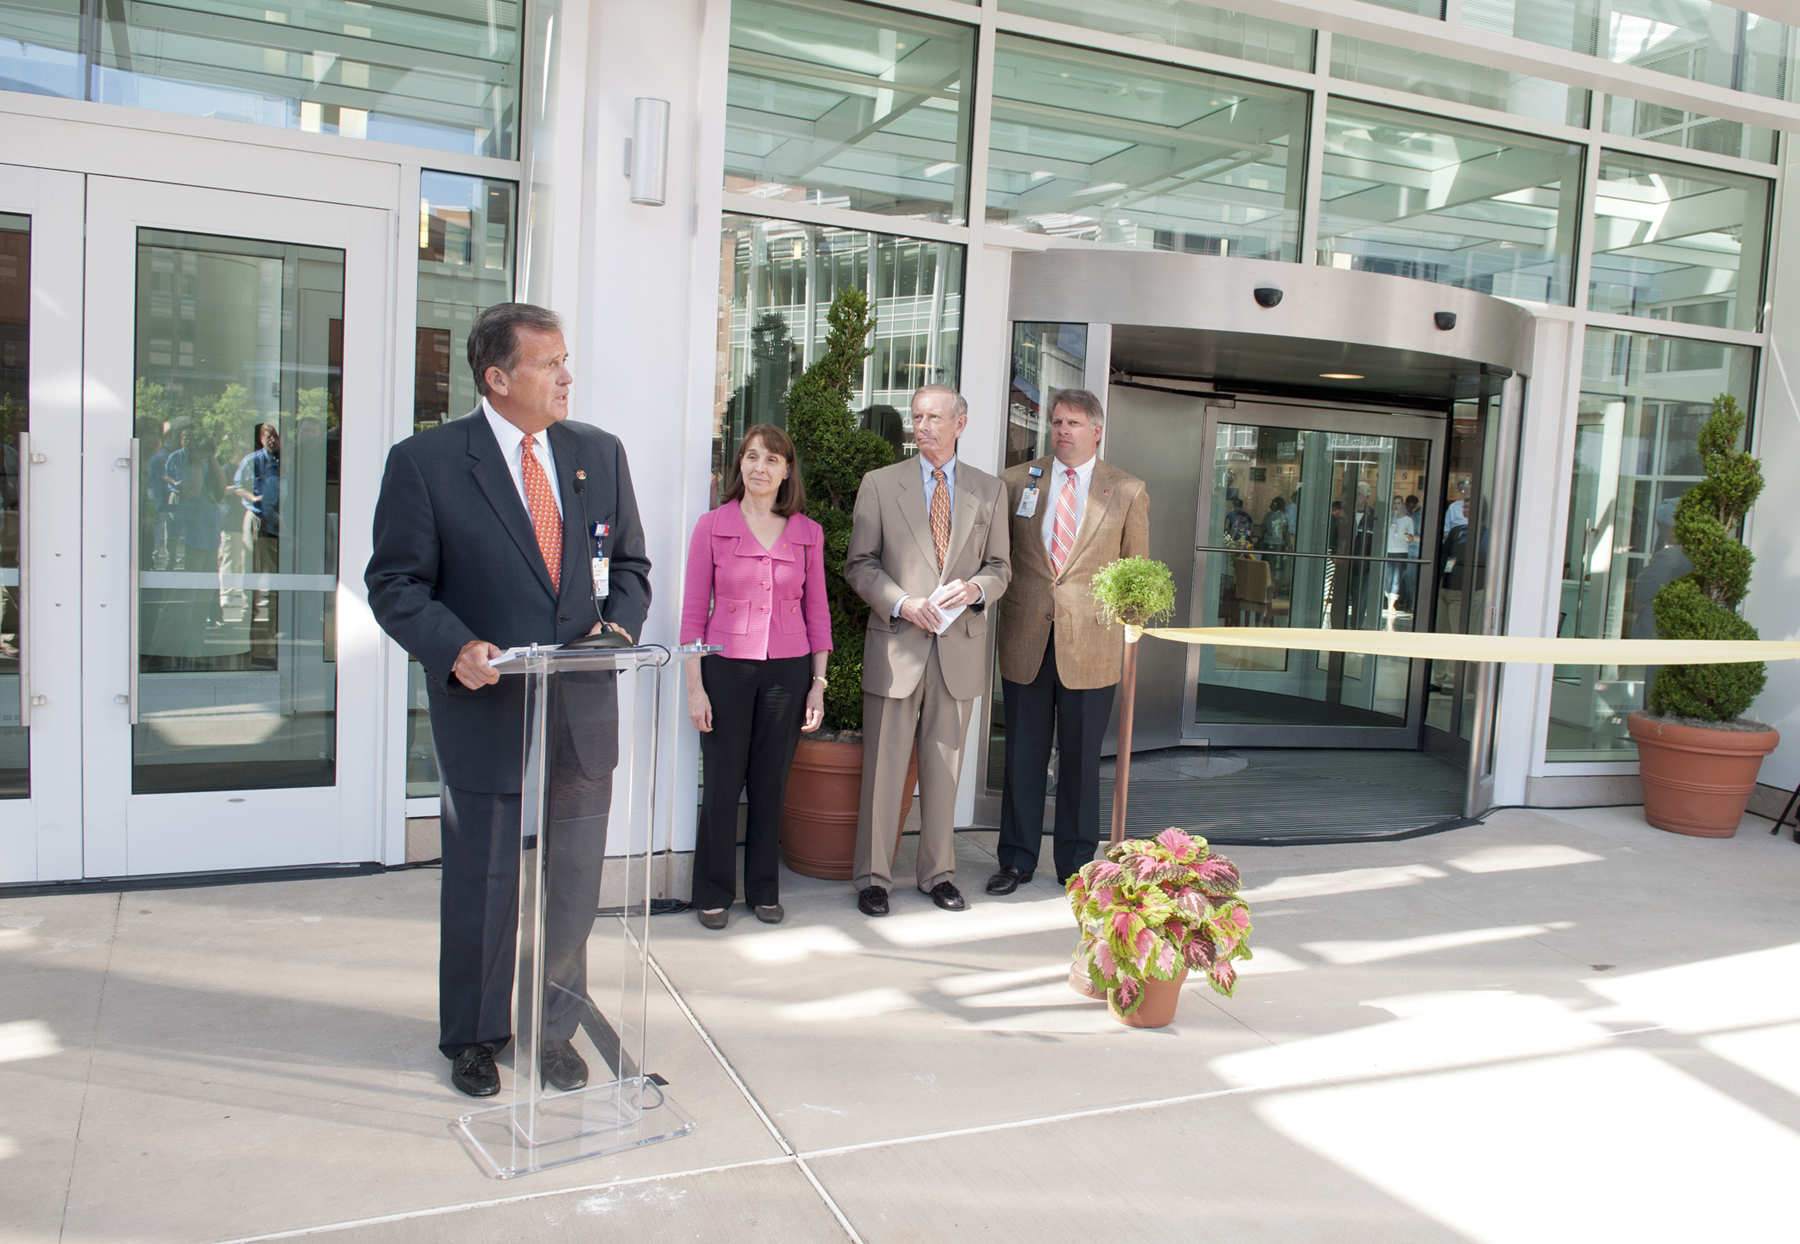 Left to Right: R. Edward Howell, Nancy Dunlap, Pat Hogan and Bo Cofield stand in front of a crowd at ribbon cutting ceremony at the UVA Hospital